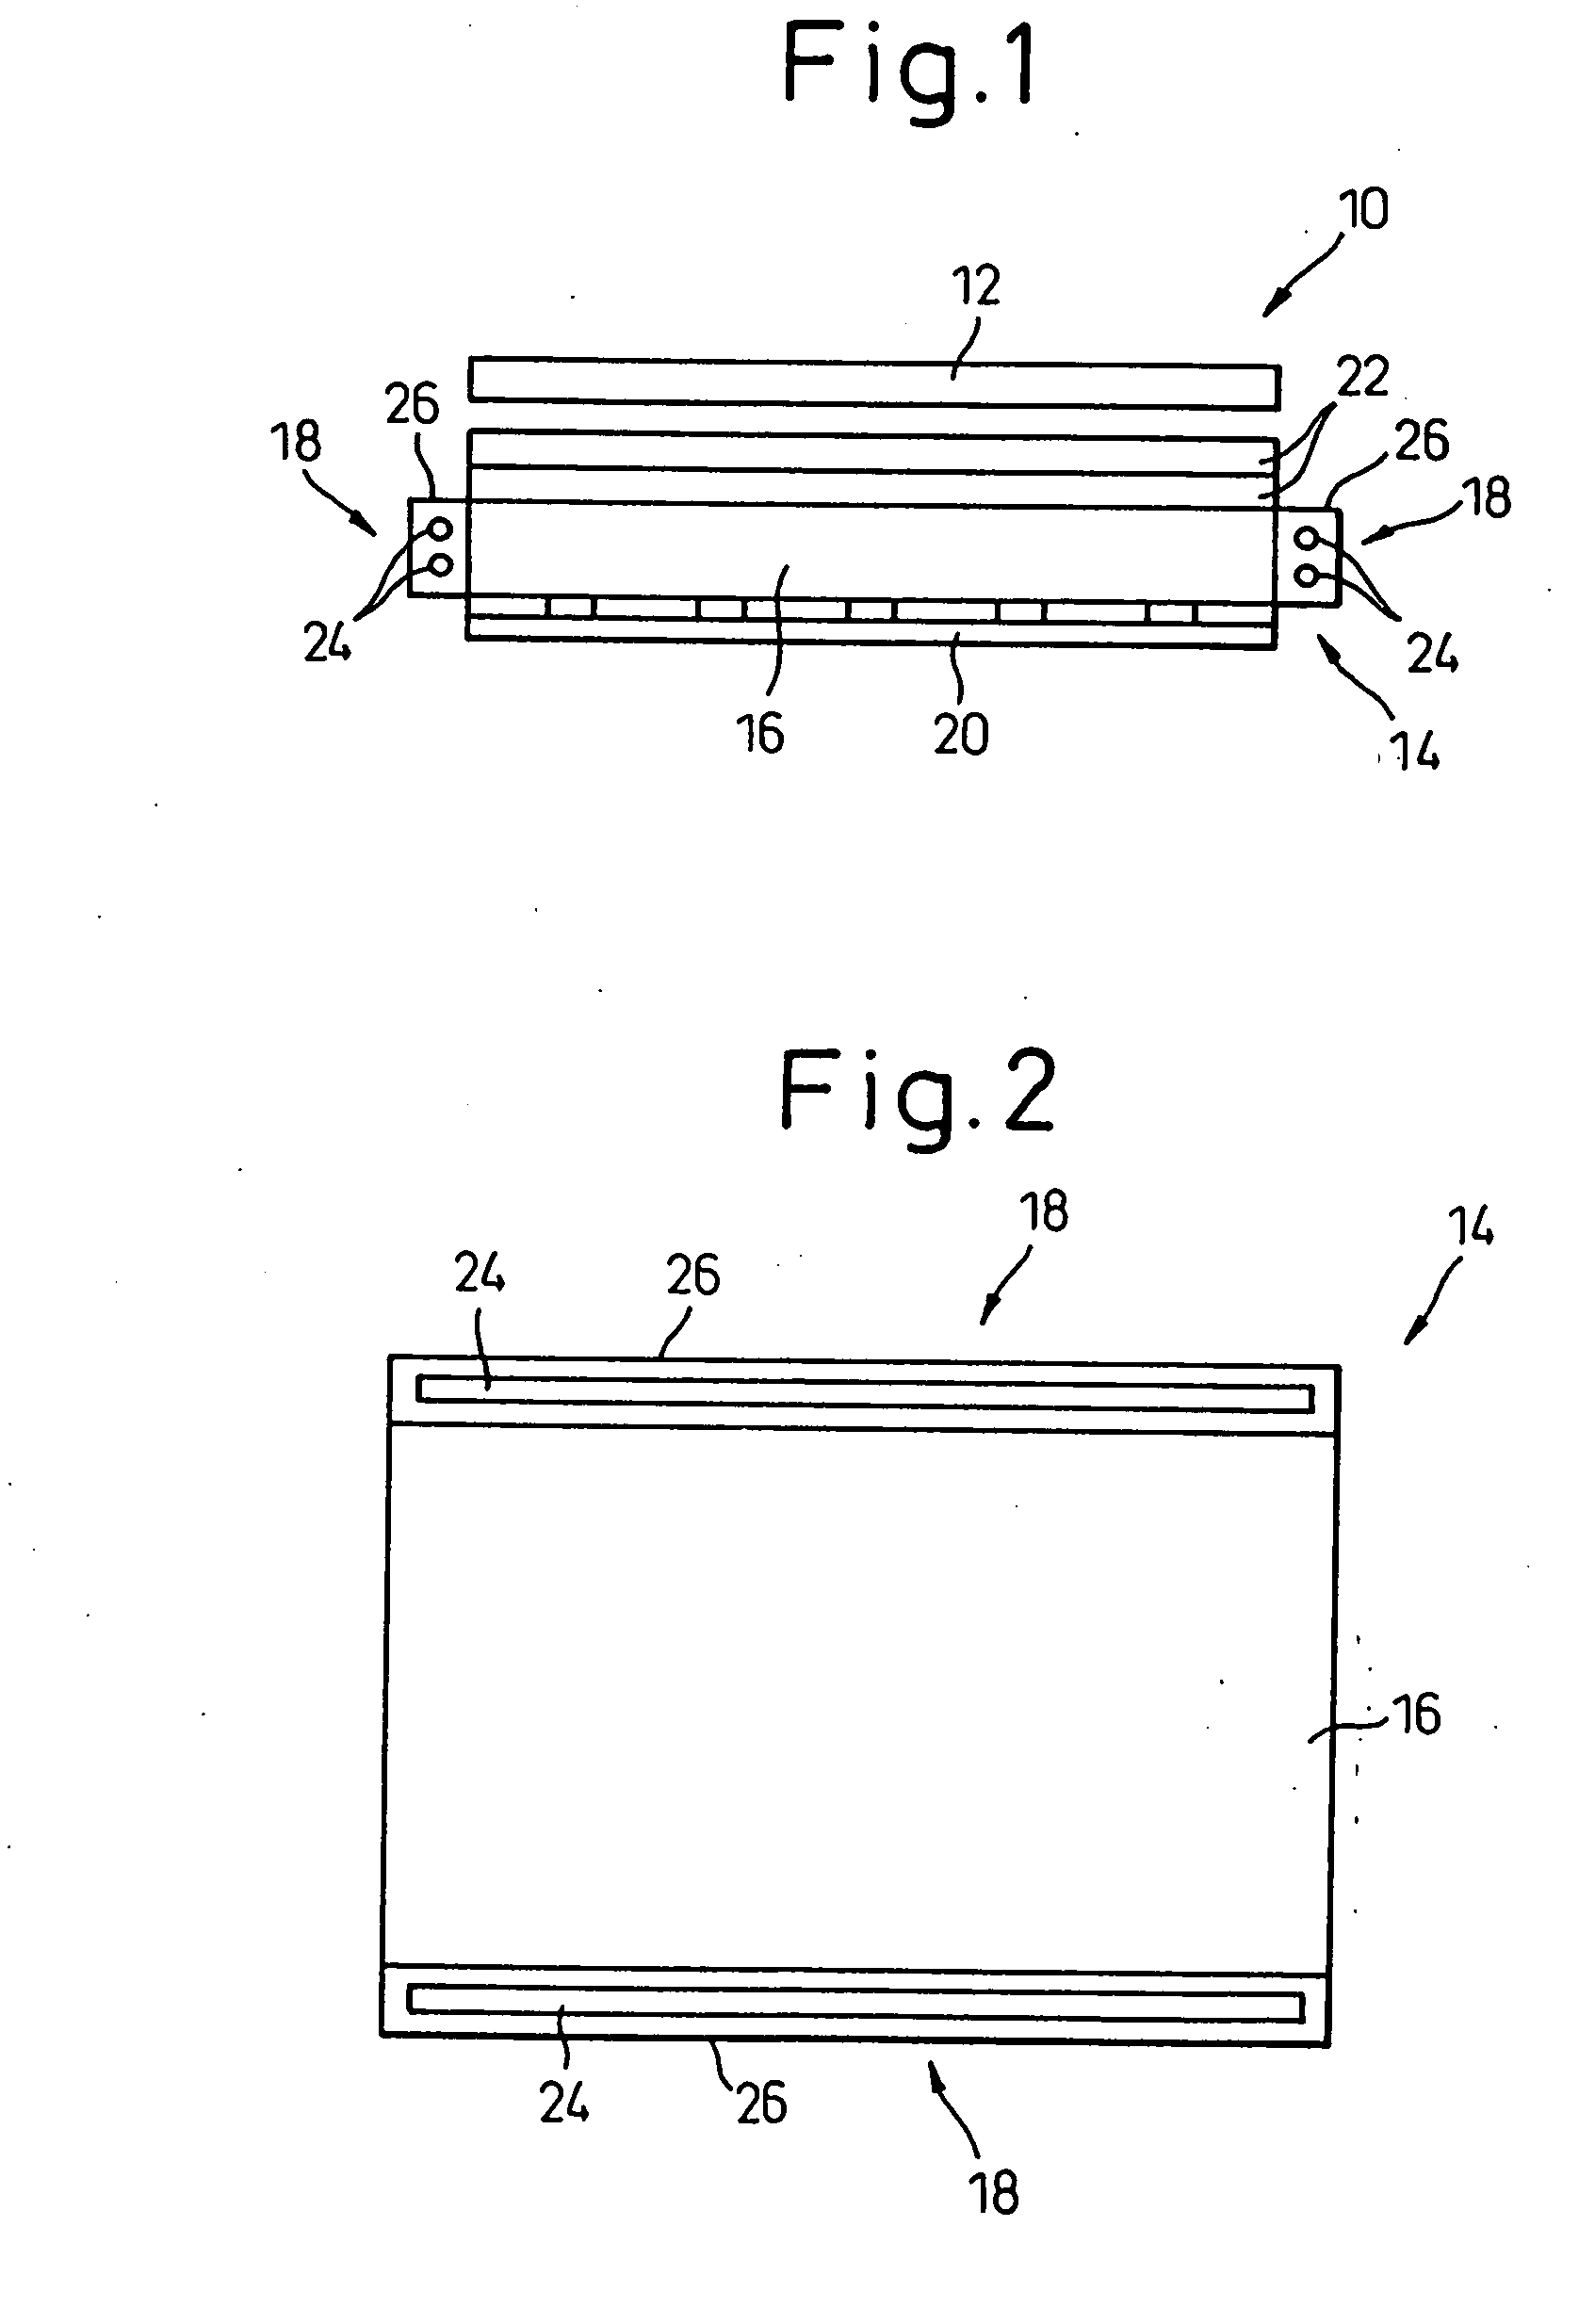 Backlight having discharge tube, reflector and heat conduction member contacting discharge tube